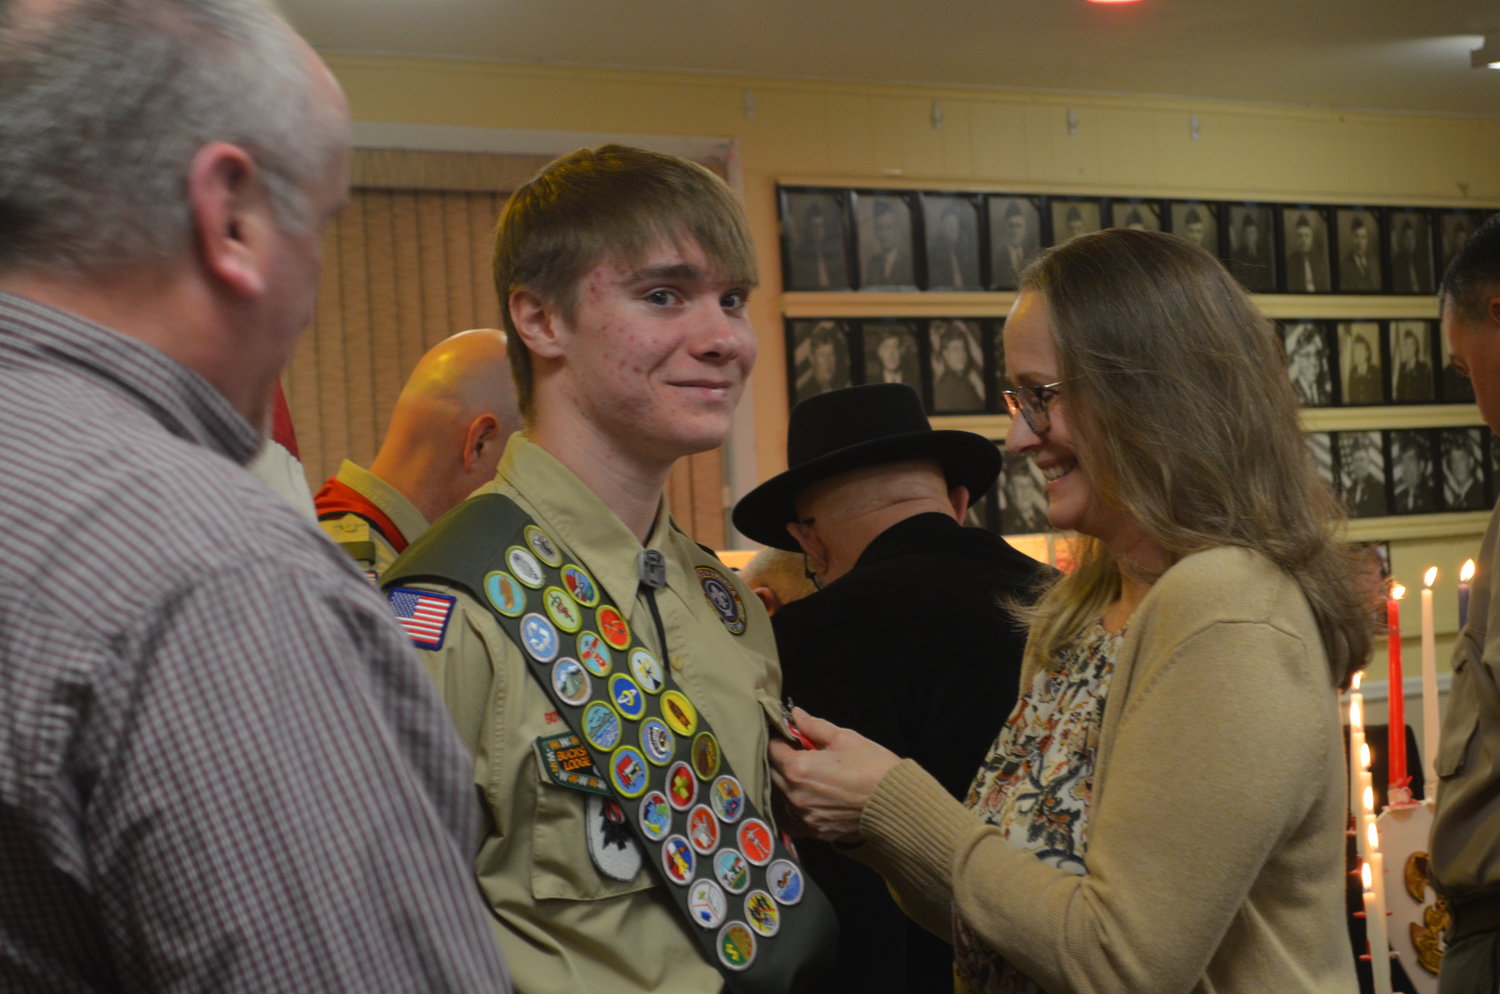 Ryan Noonan got a helping hand from his proud mother, Amy, who pinned on his Eagle Scout badge.